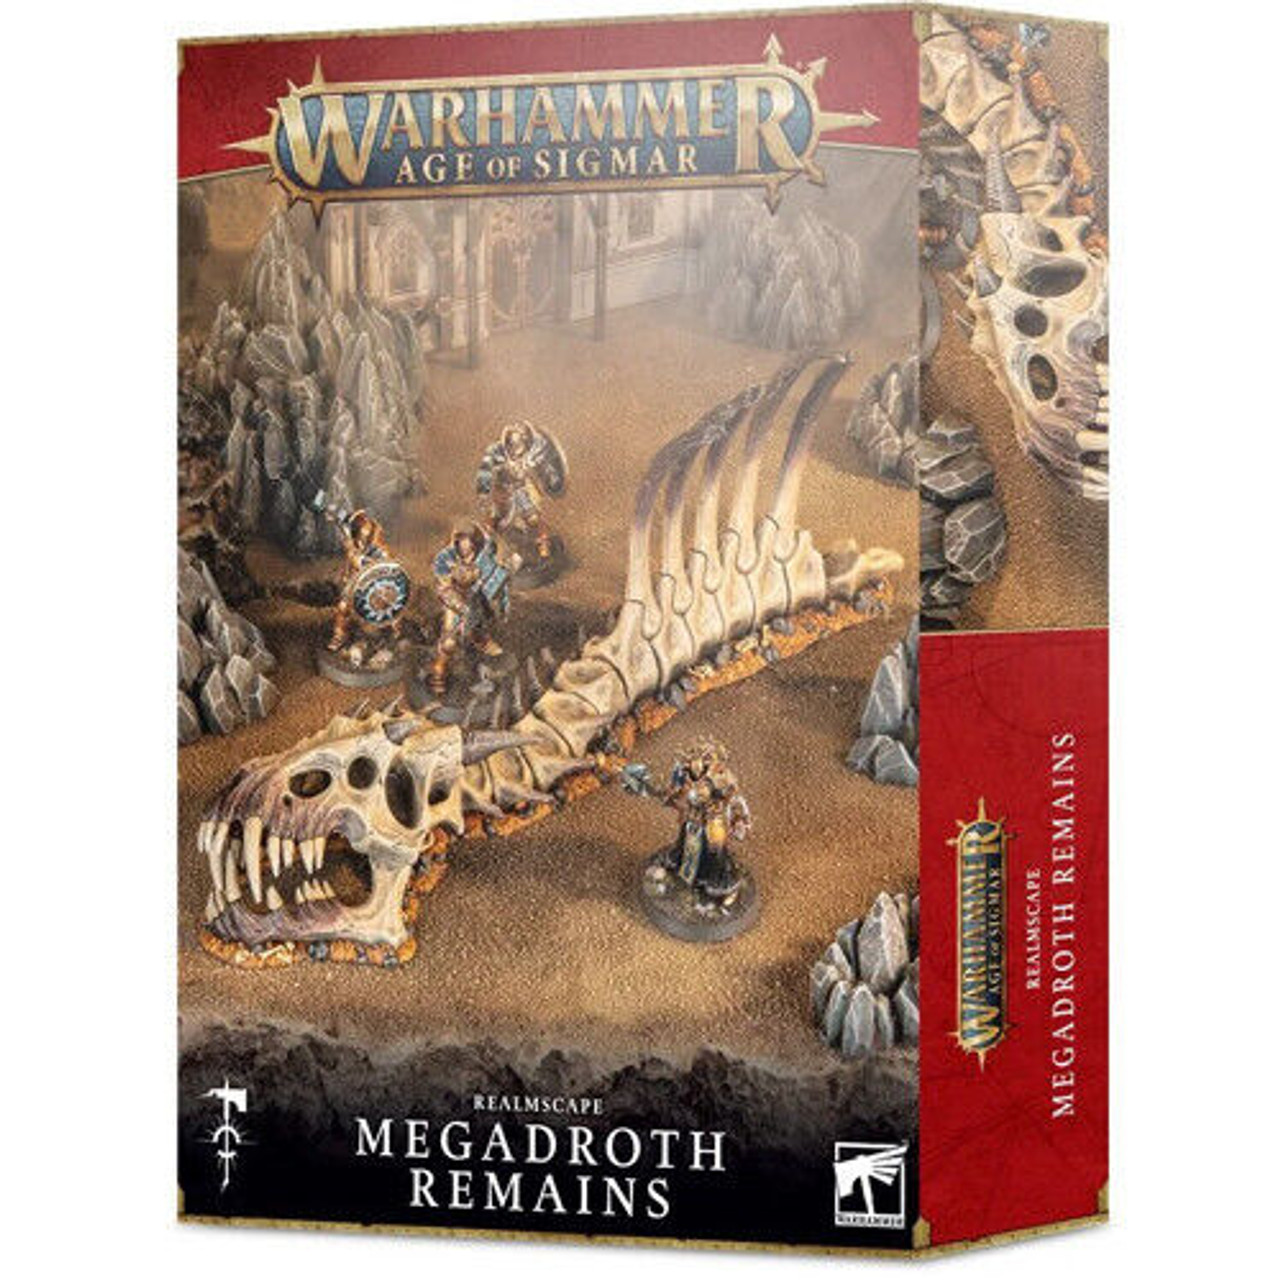 Warhammer Age of Sigmar: Realmscape - Megadroth Remains